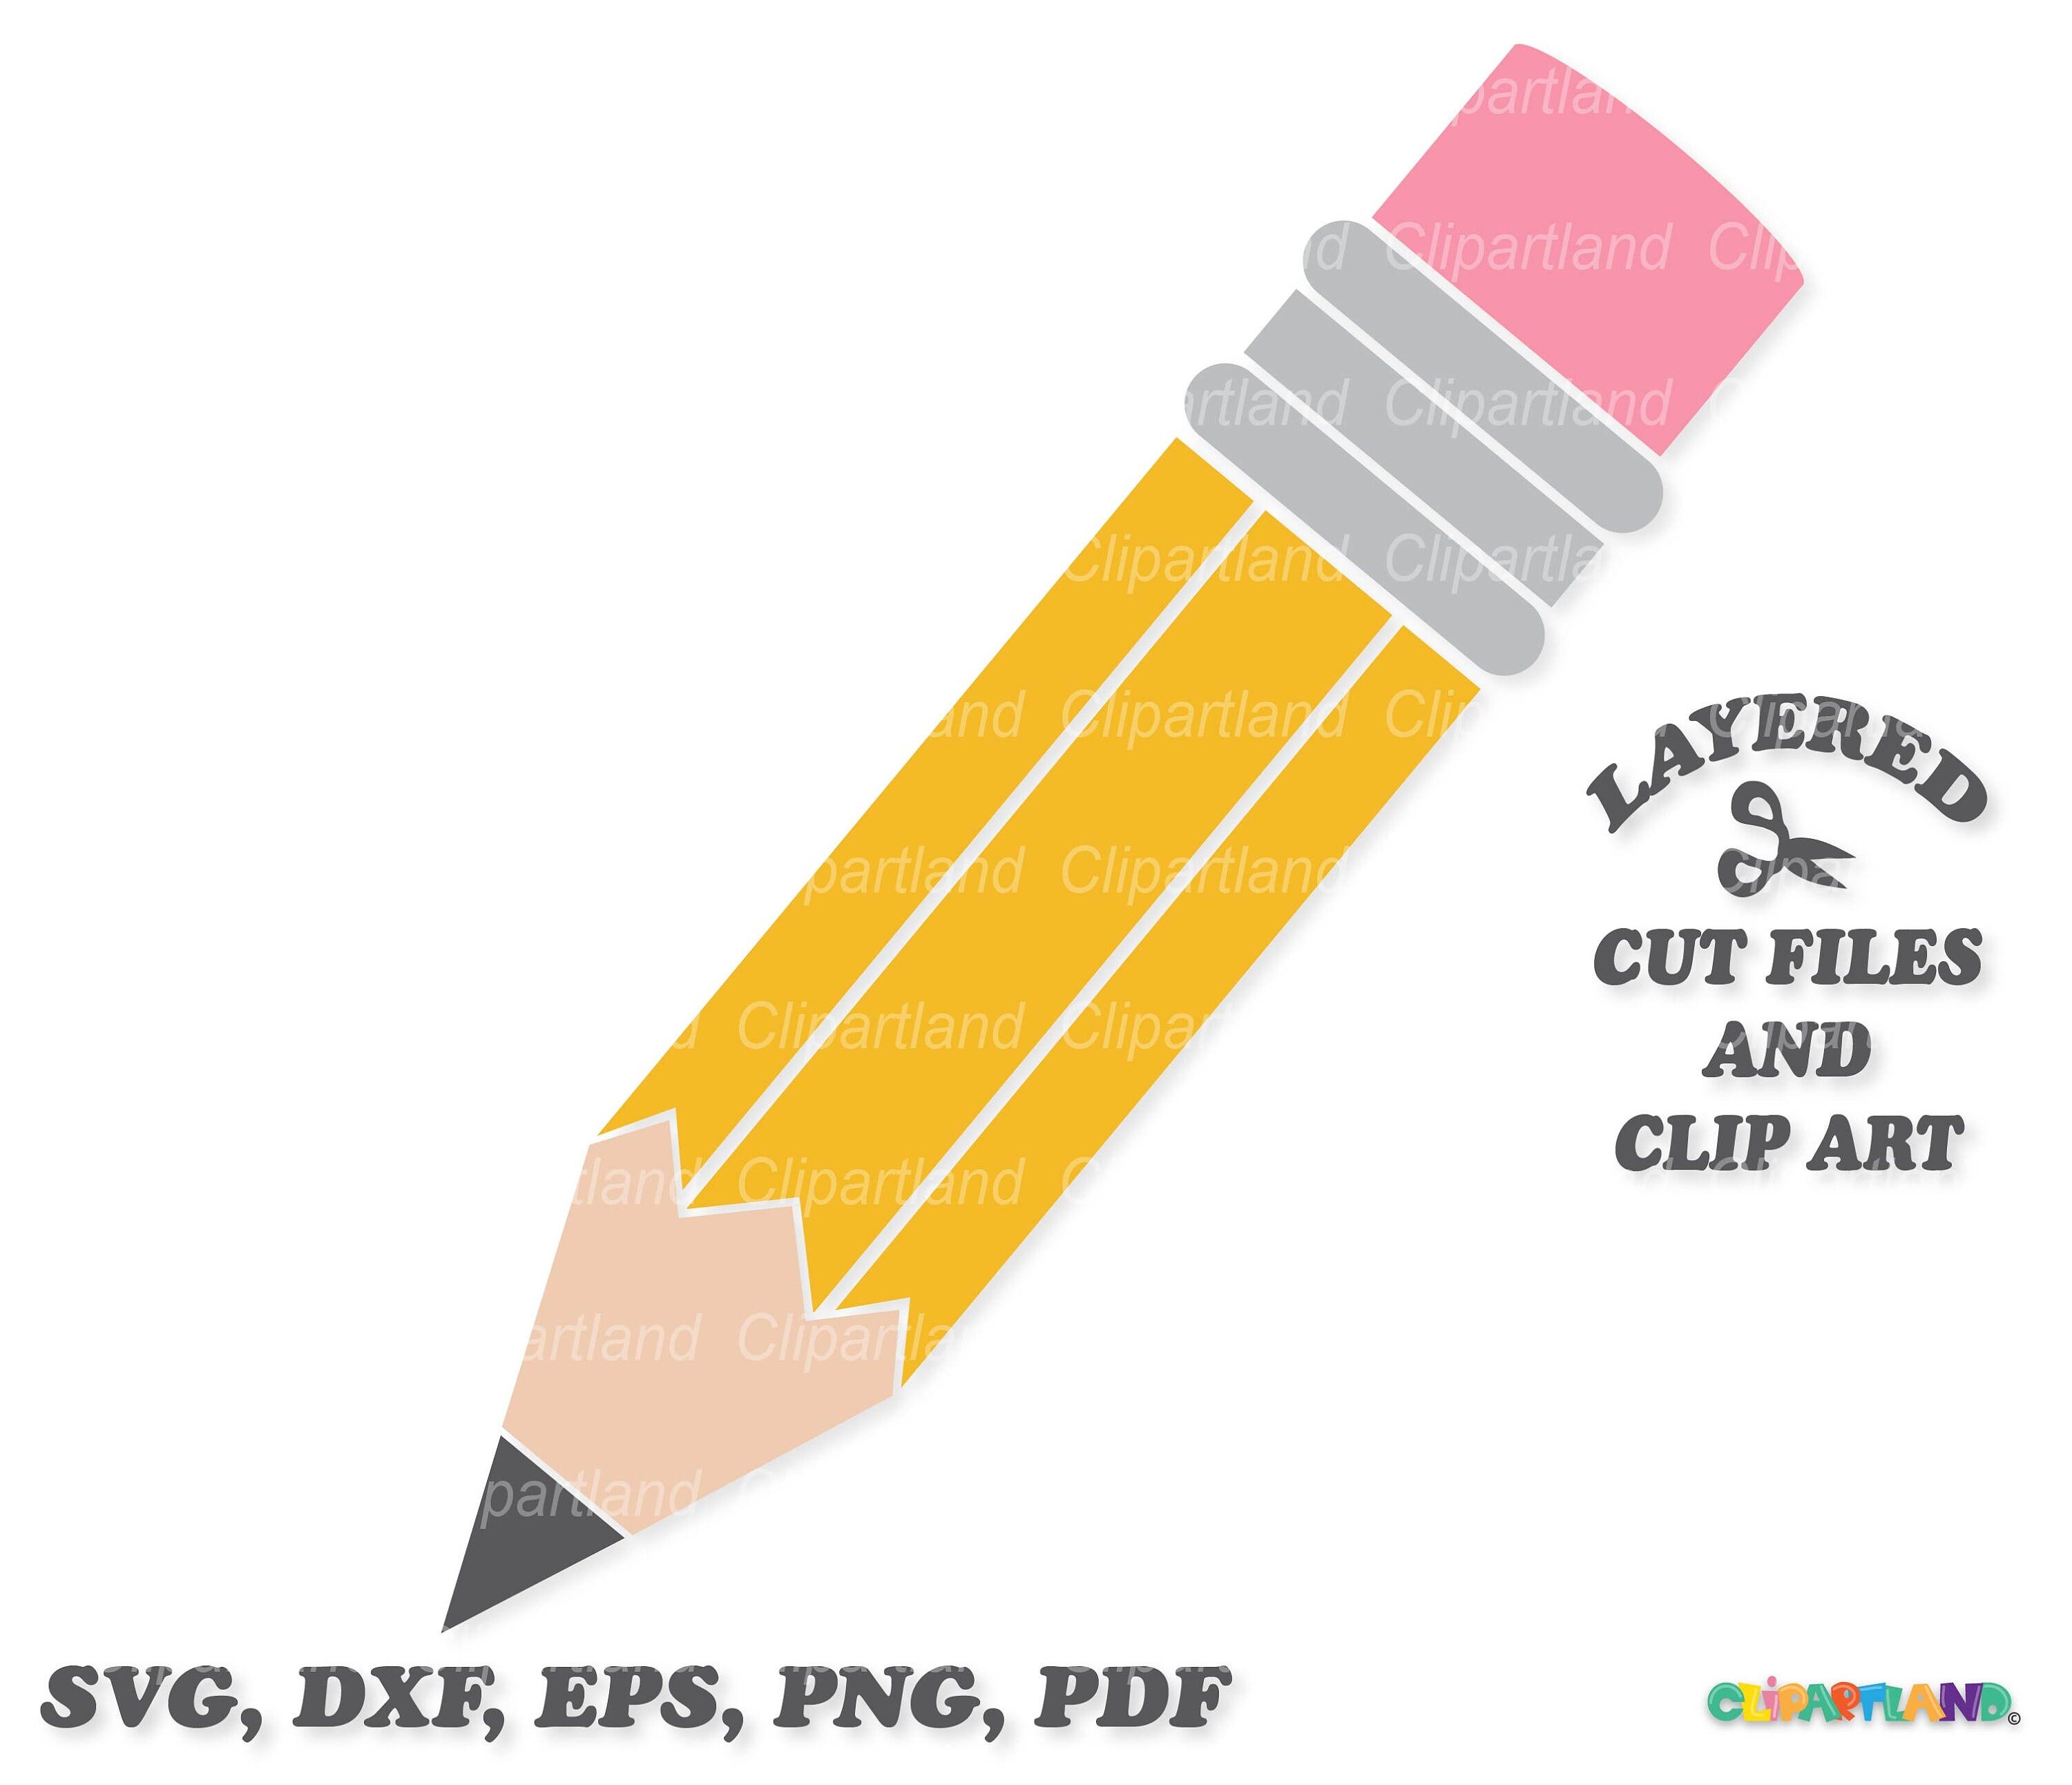 INSTANT Download. School yellow pencil  svg cut file and clip art. Personal and commercial use. P_1.